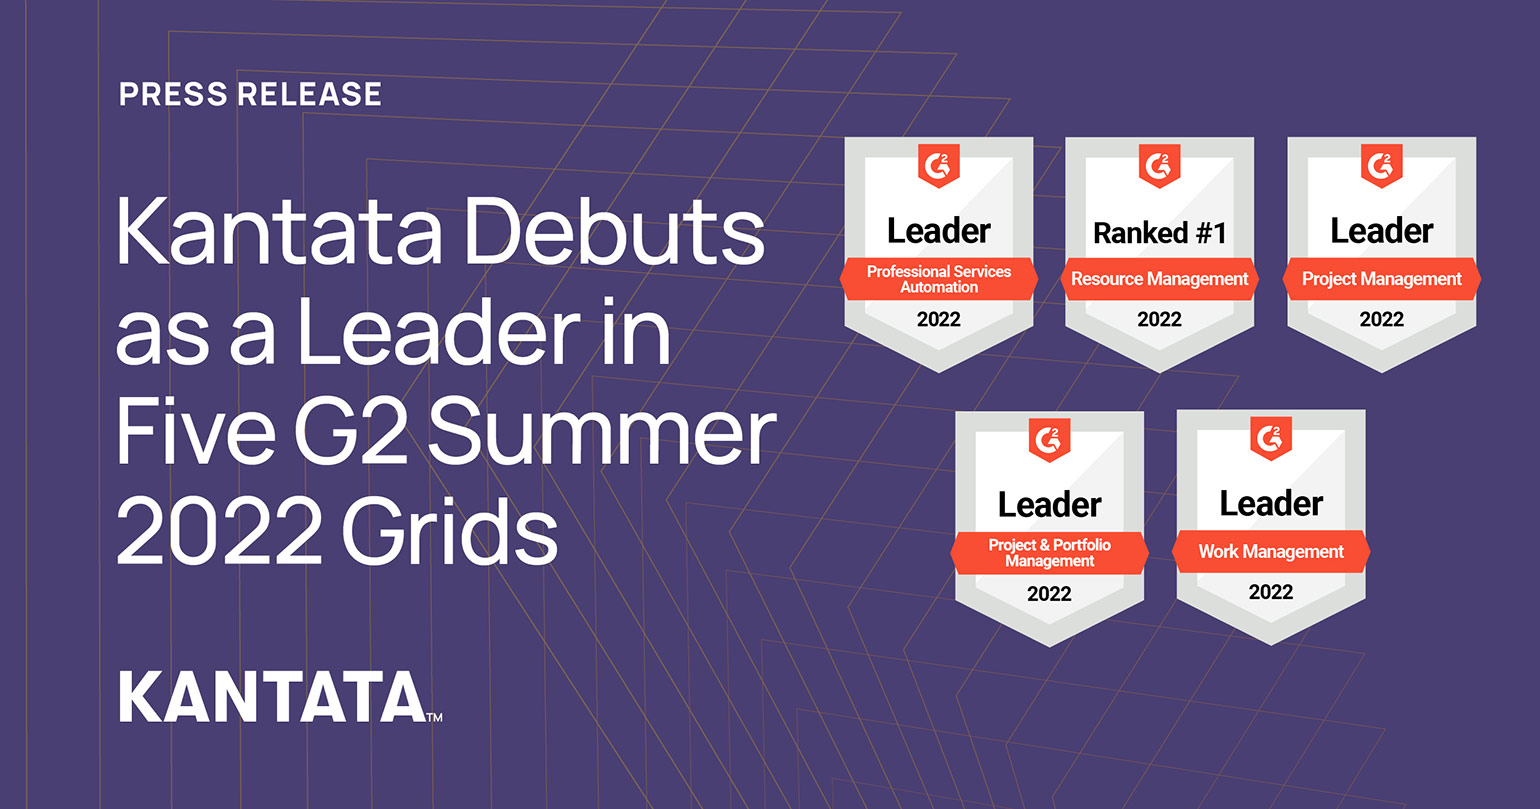 Kantata Debuts as a Leader in Five G2 Summer 2022 Grids